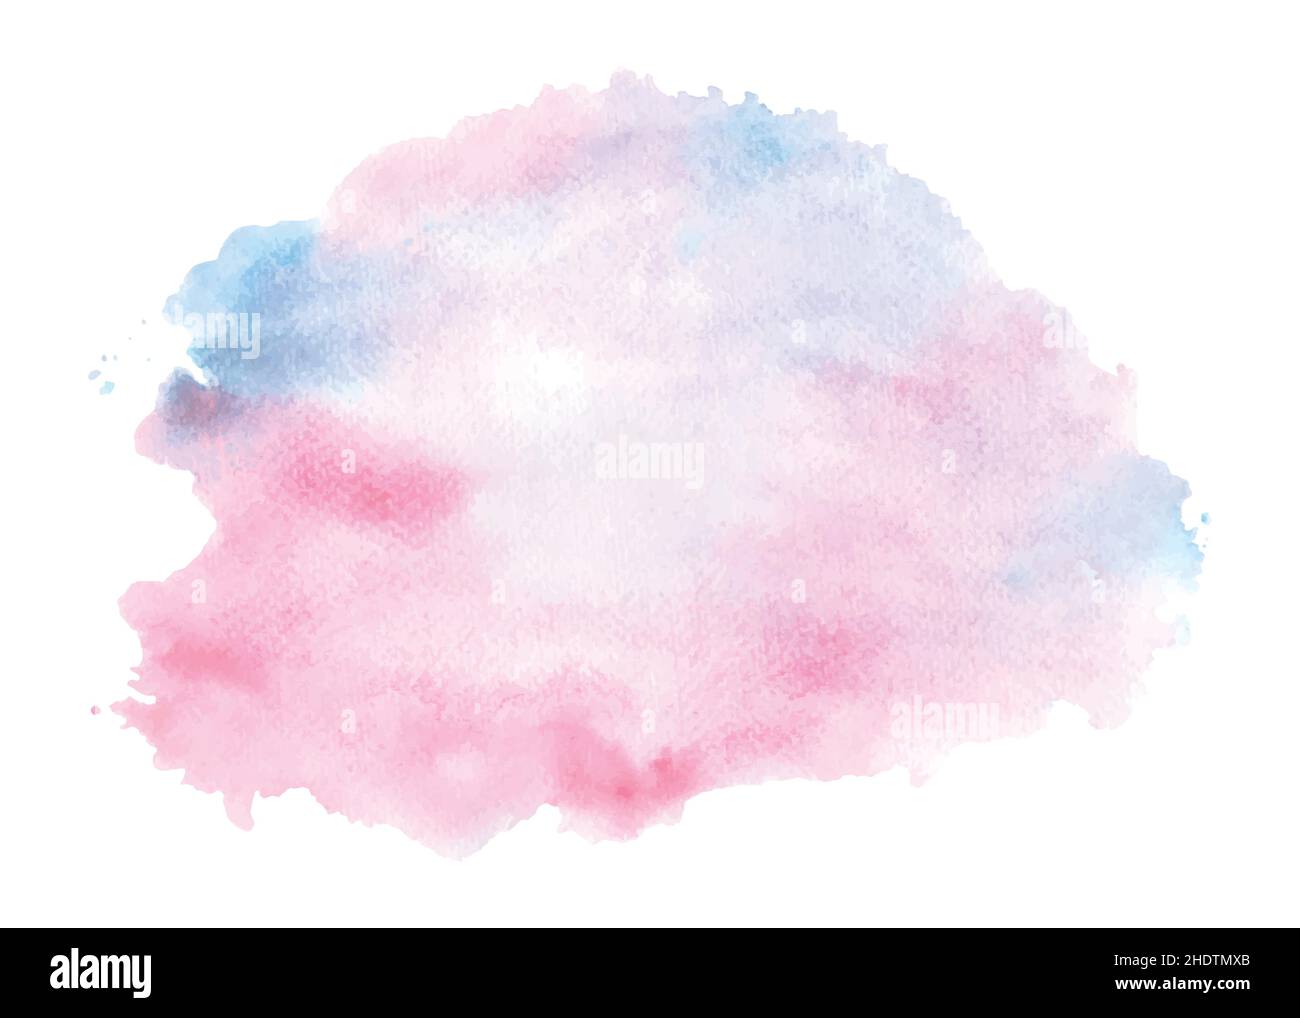 Pink Abstract Watercolor Background Stock Illustration by